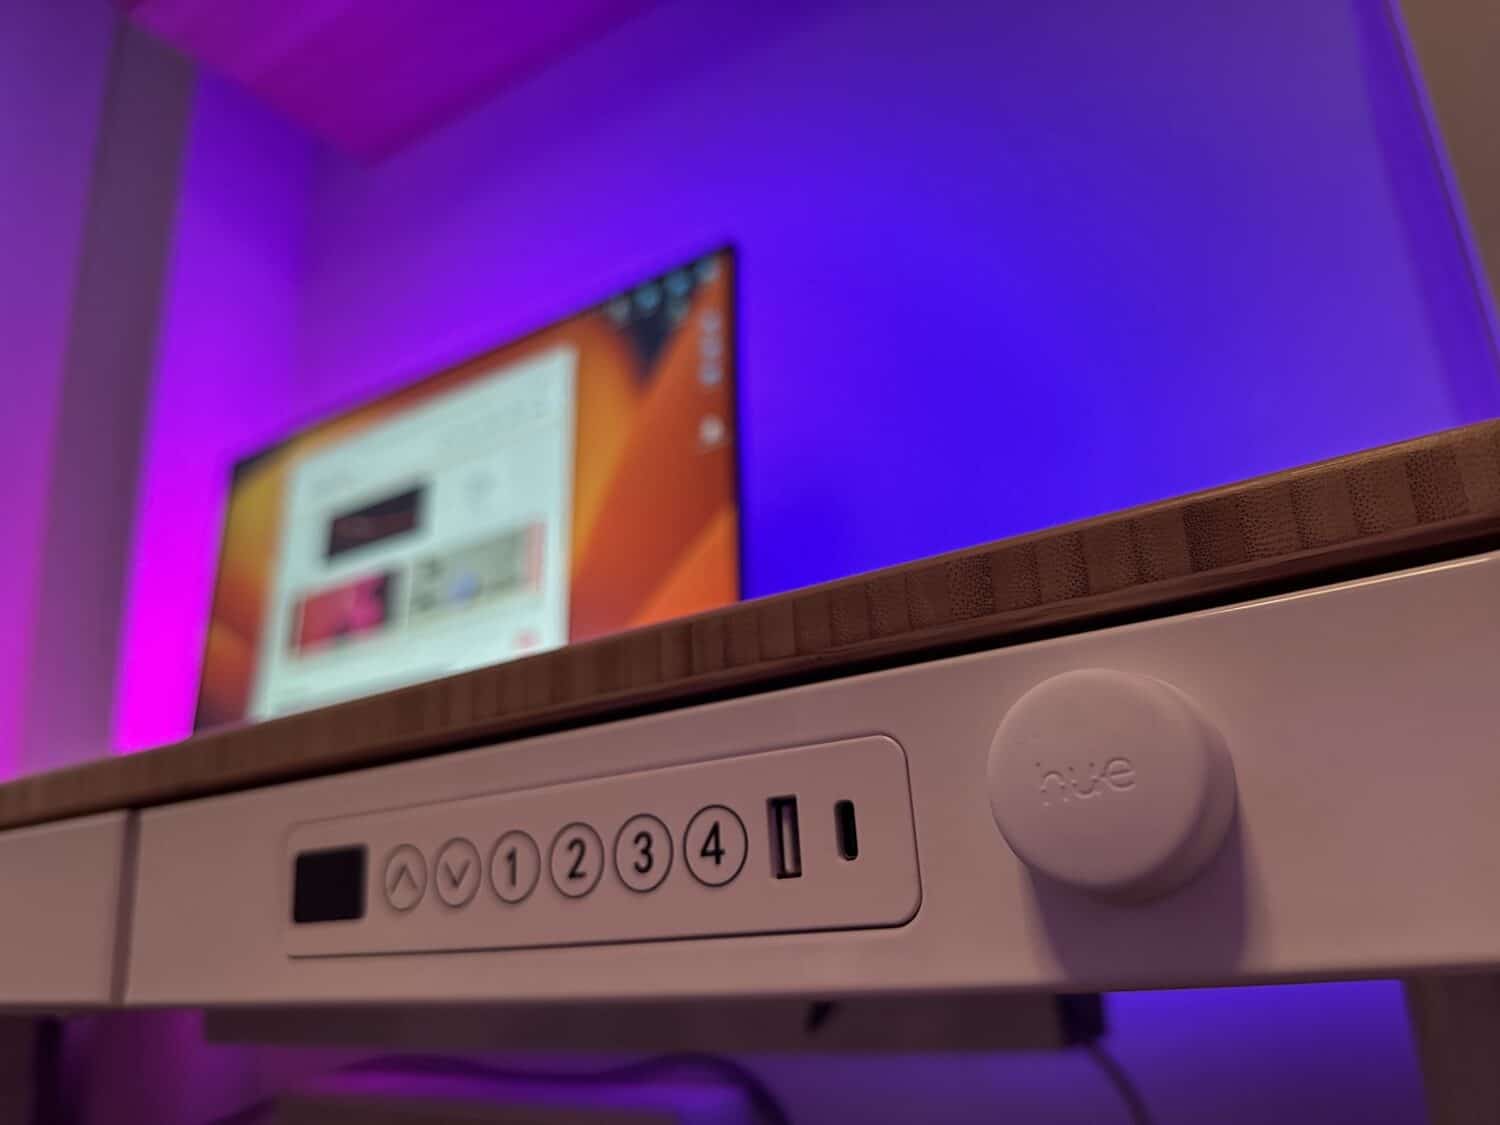 Hueblog: Show your Hue: Monitor lighting also without sync effect